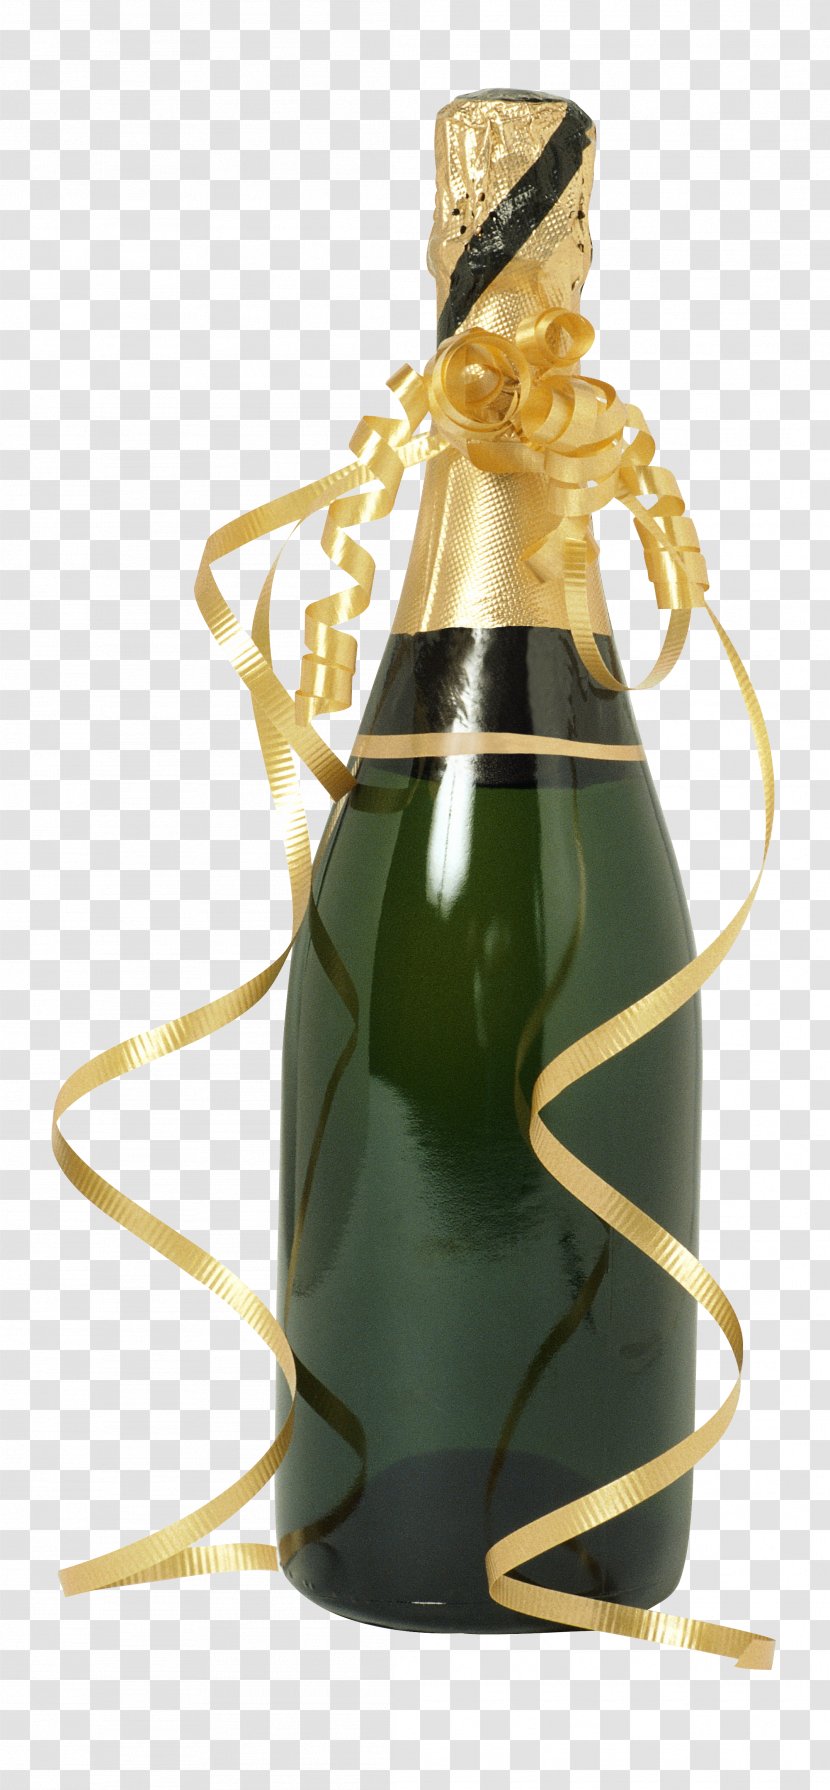 Champagne Cocktail Hot Buttered Rum Electronic Cigarette Aerosol And Liquid Transparent PNG